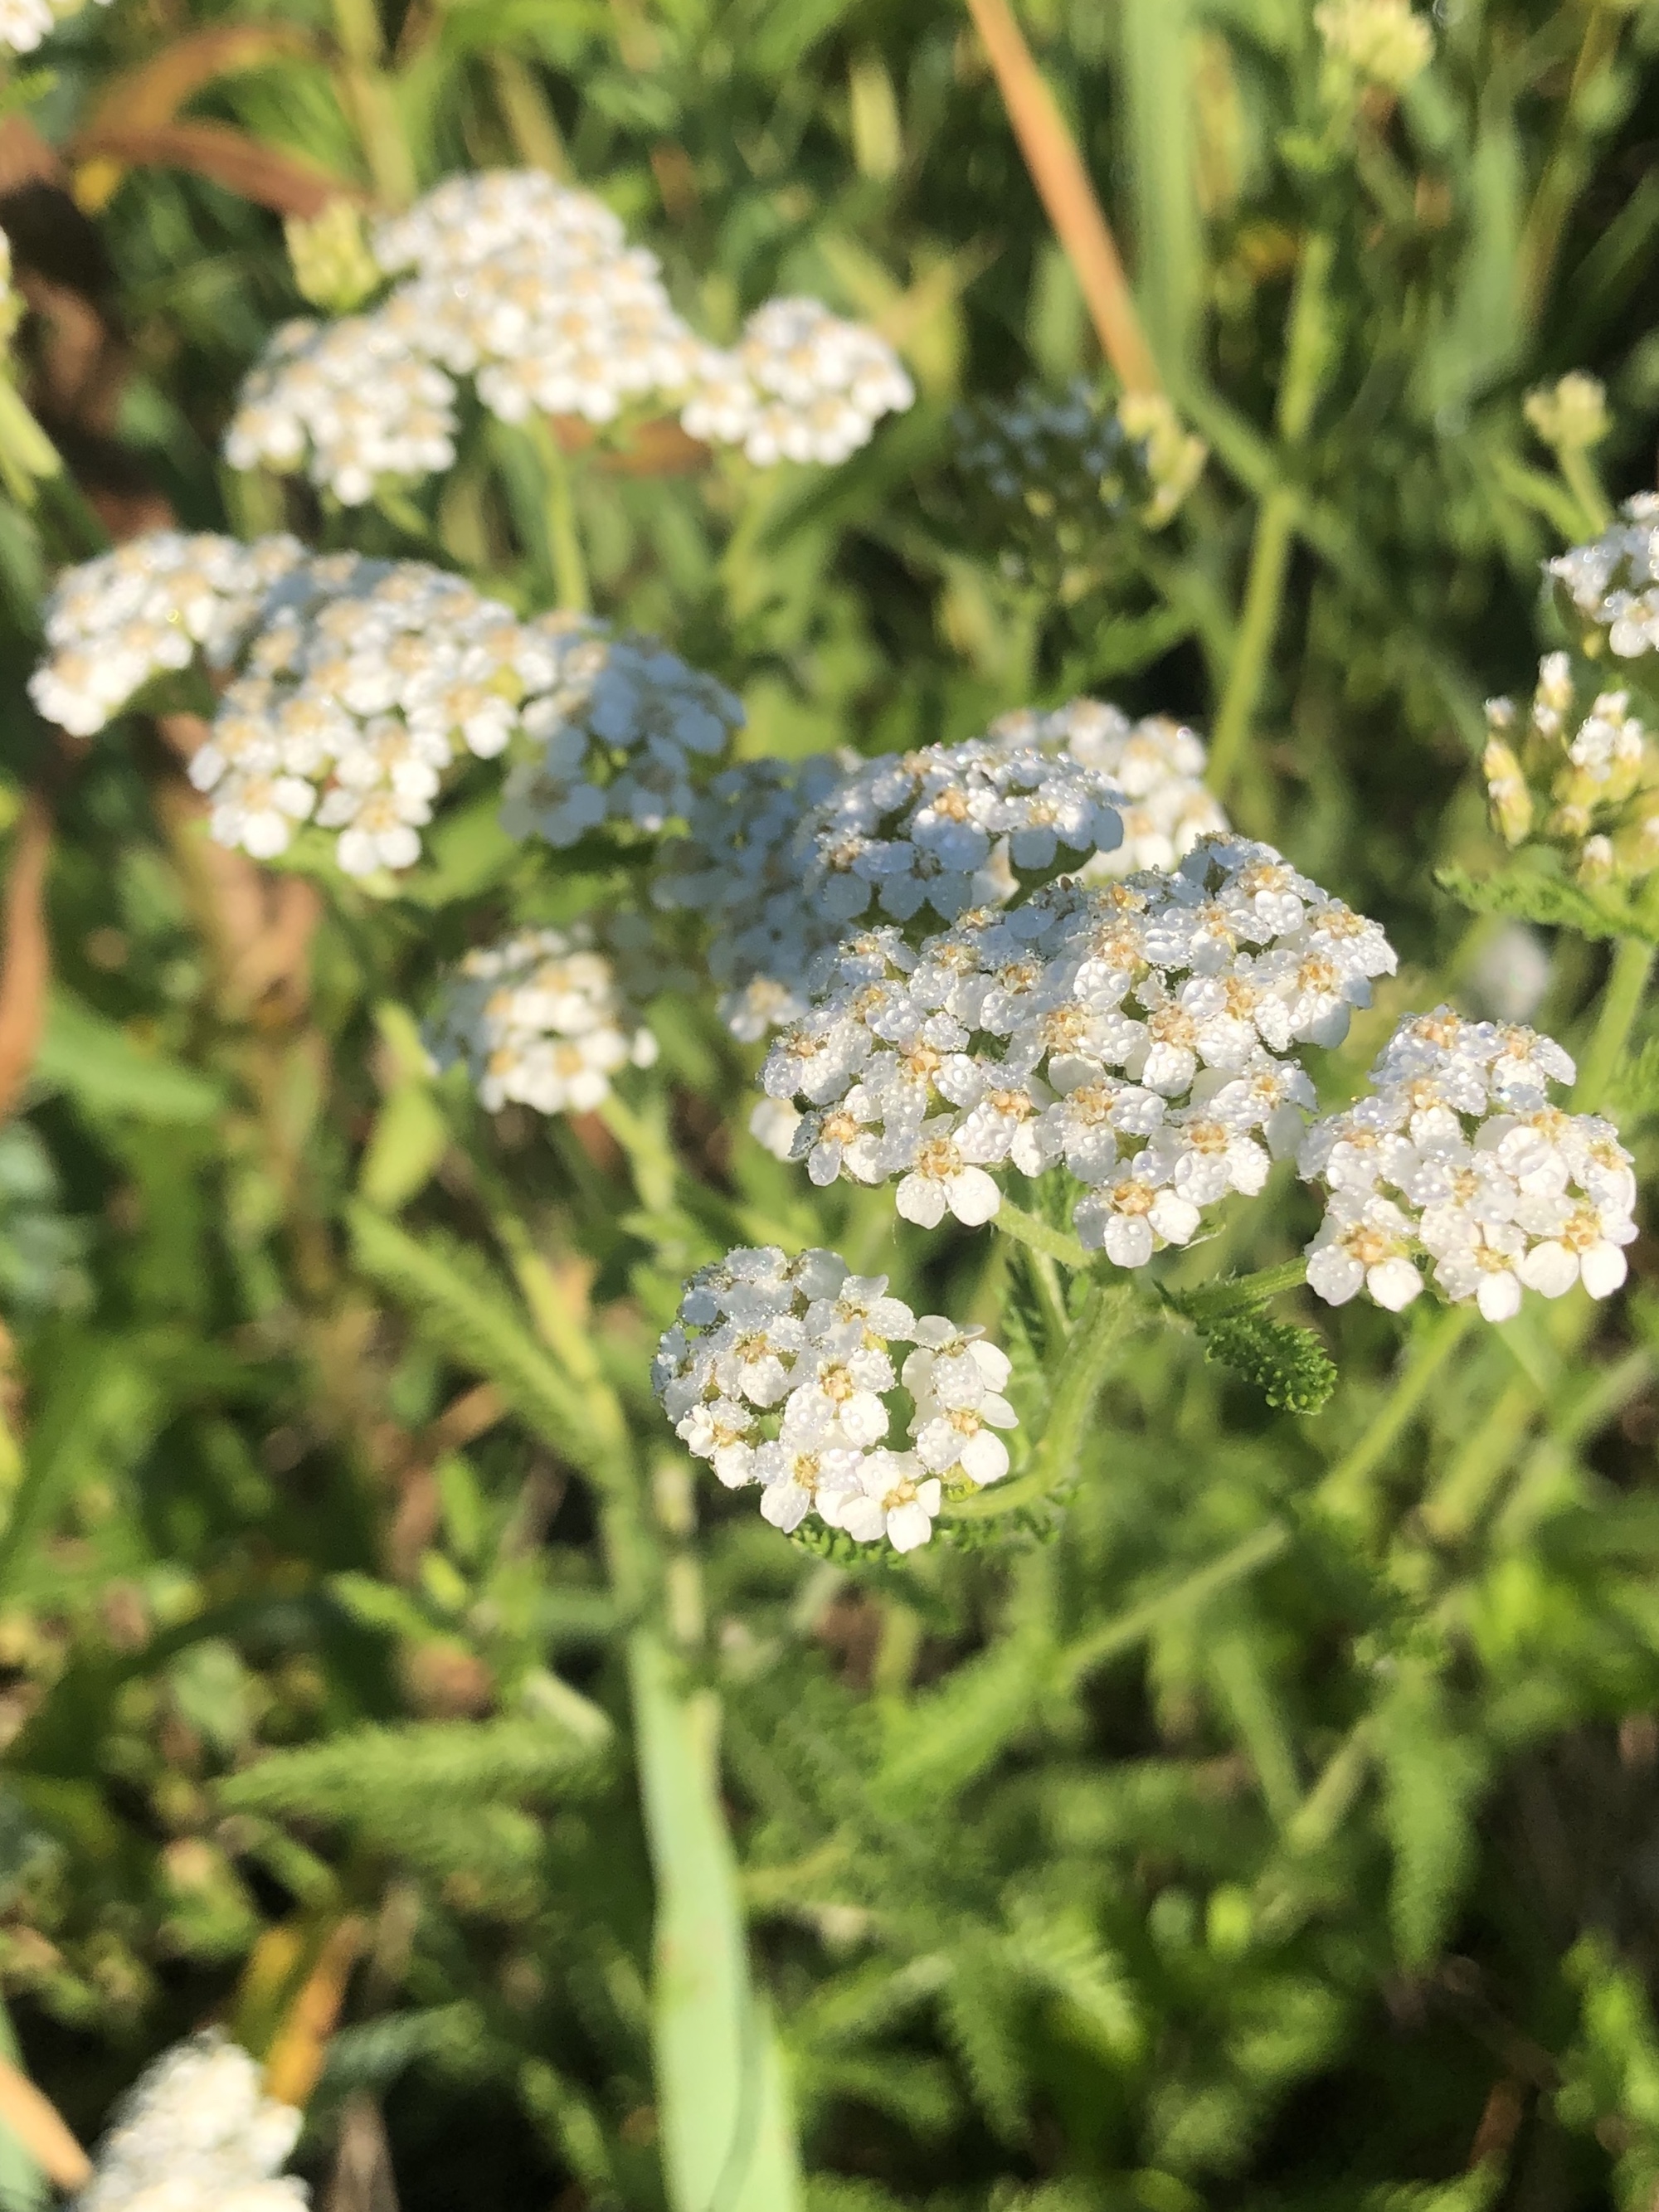 Common Yarrow on shore of Marion Dunn Pond on June 17, 2020.